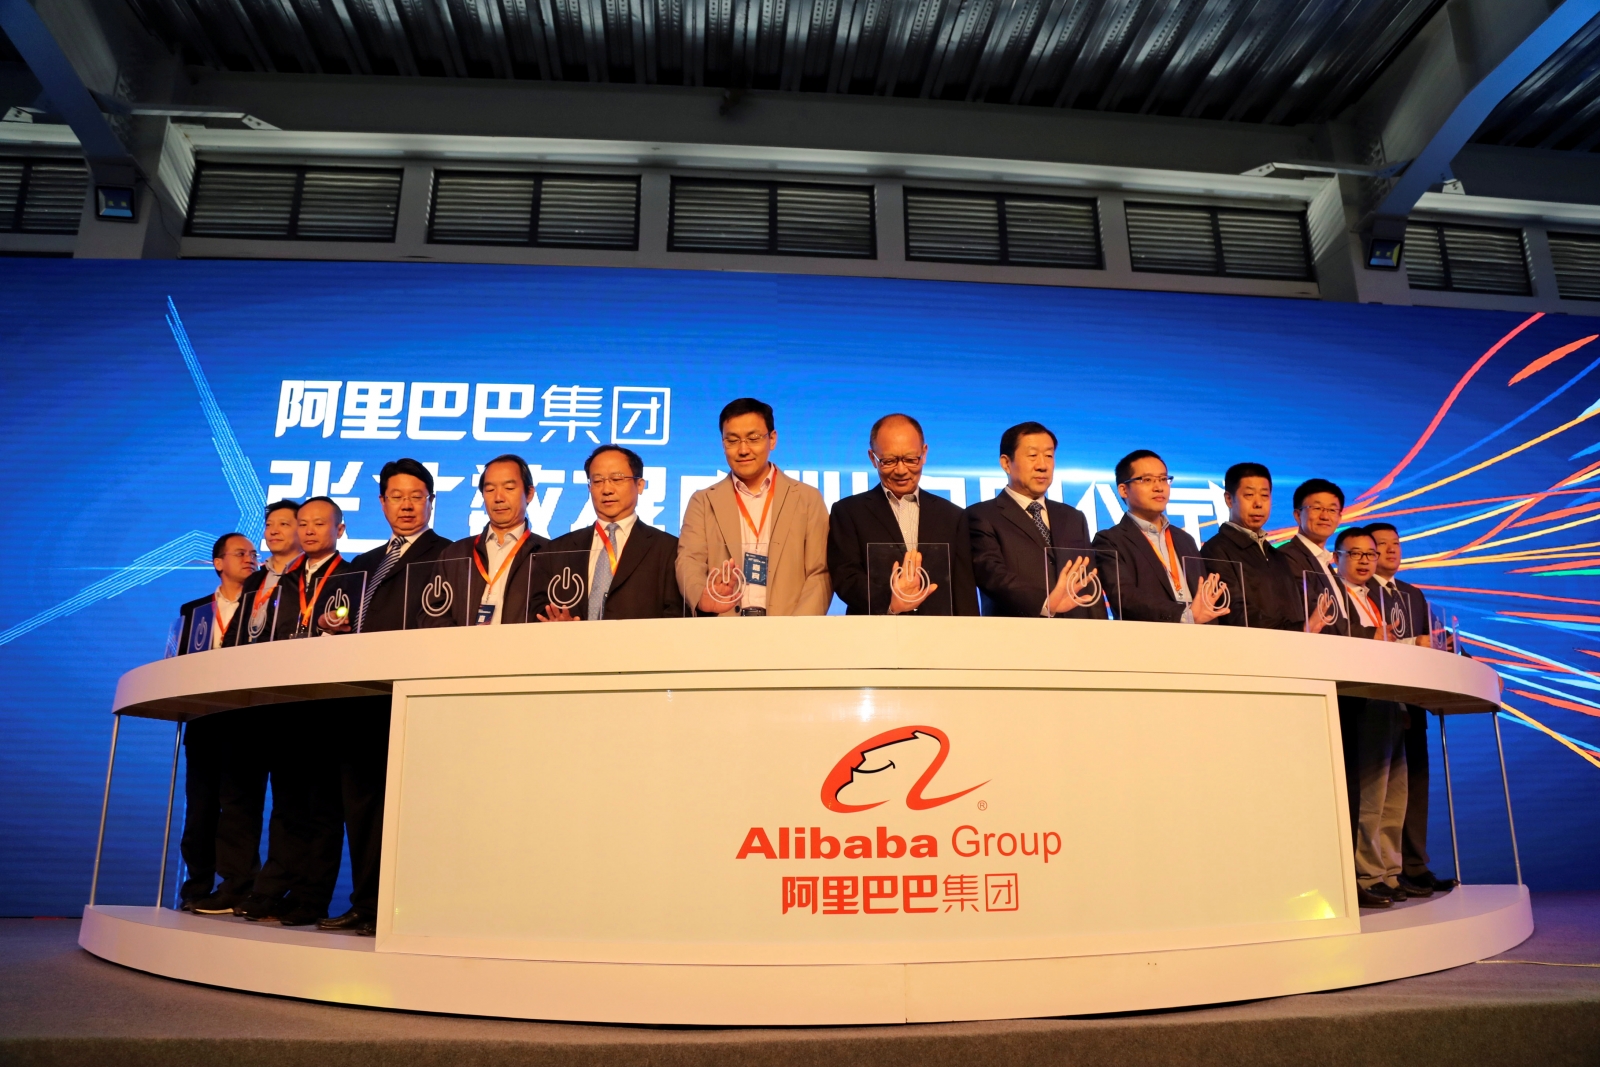 Alibaba's subtle ecommrcece strategy to seed the world with Alipay